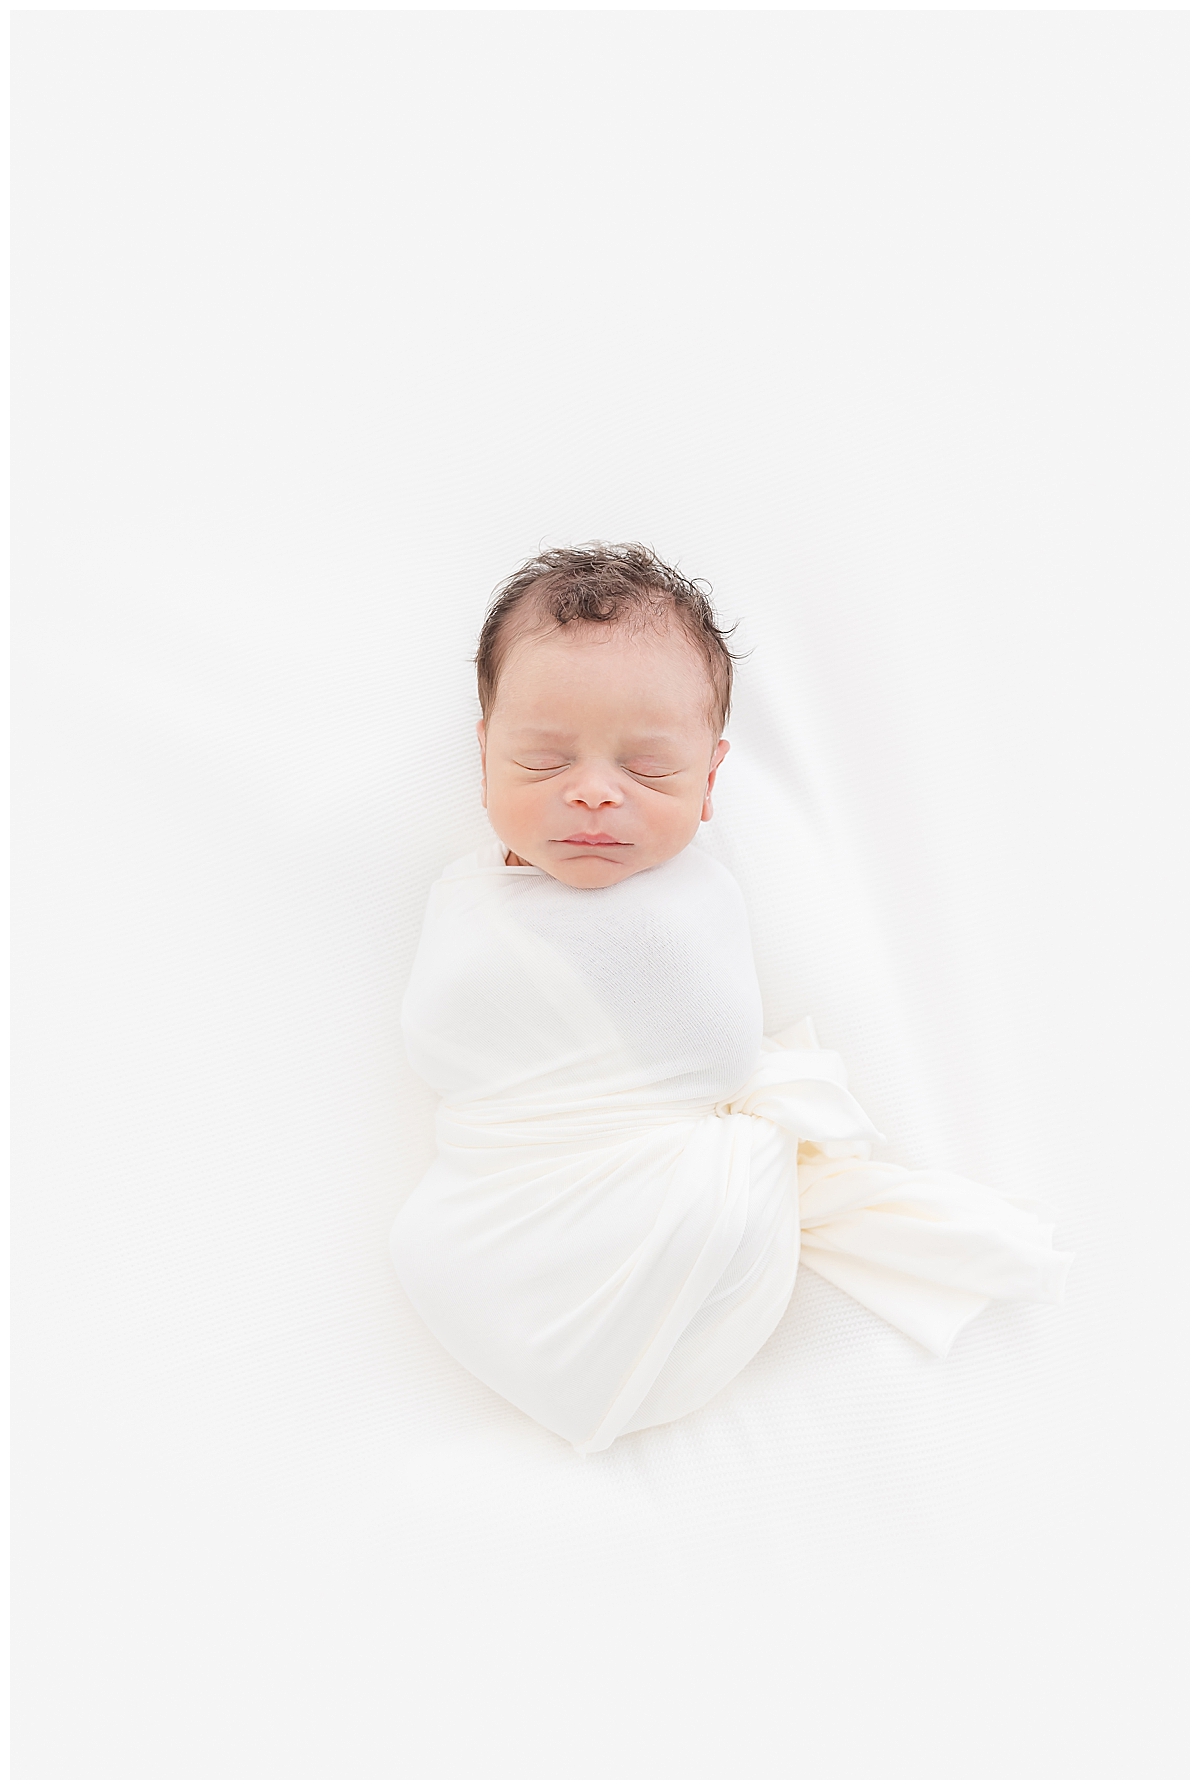 Newborn swaddled in white blanket laying on white bed